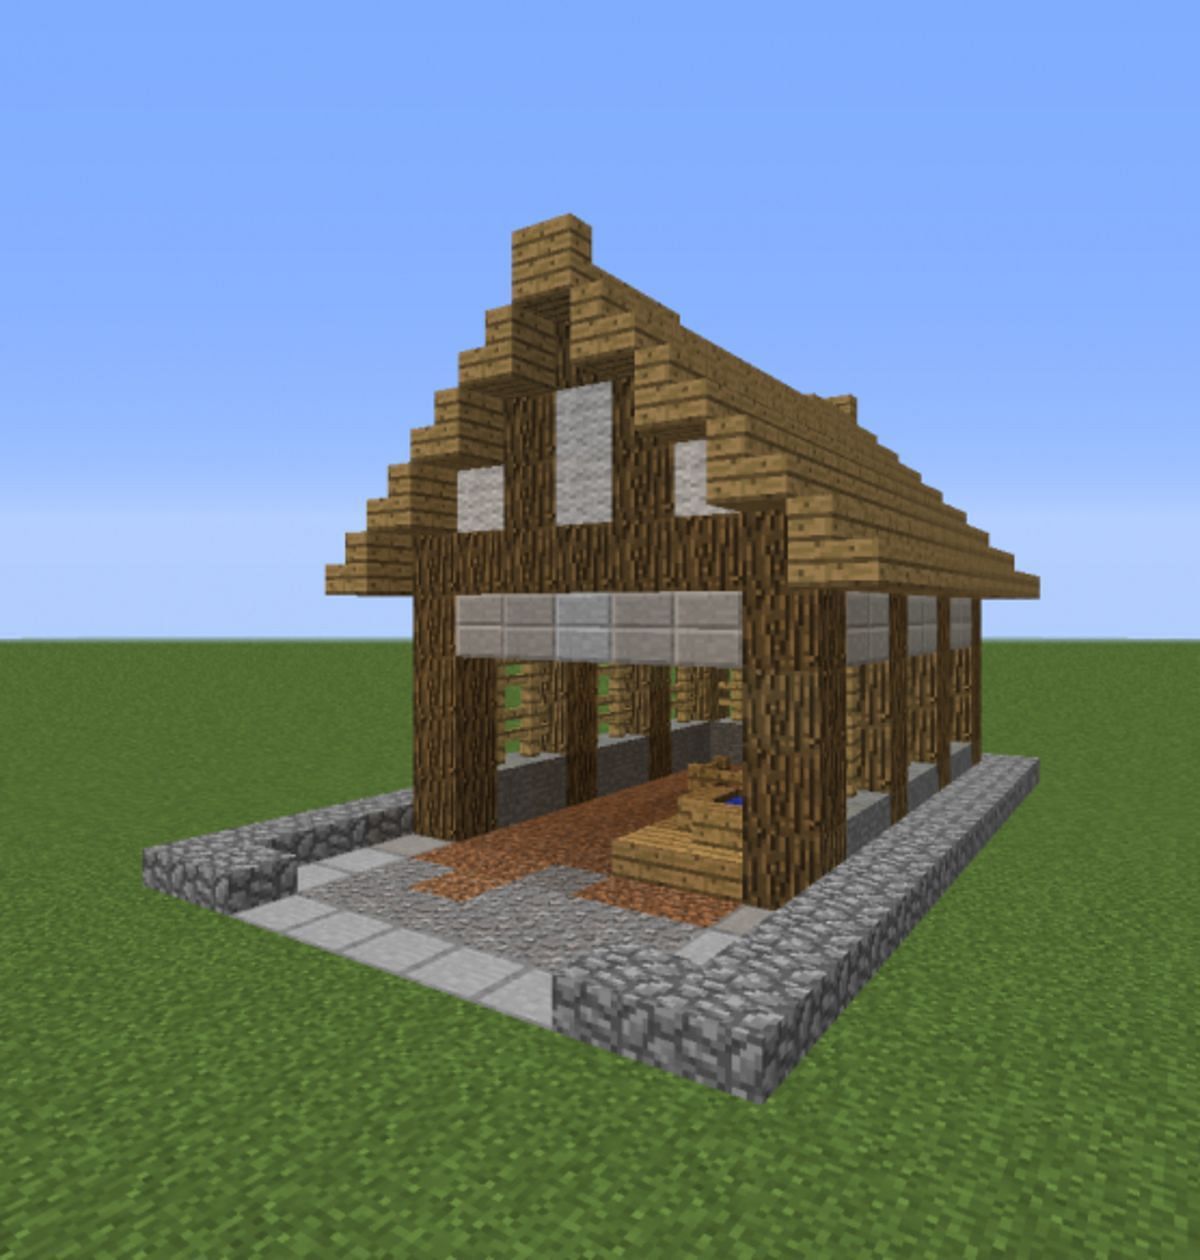 This barn is a great place to tie a player's horse (Image by Grabcraft user, NationsatWar)